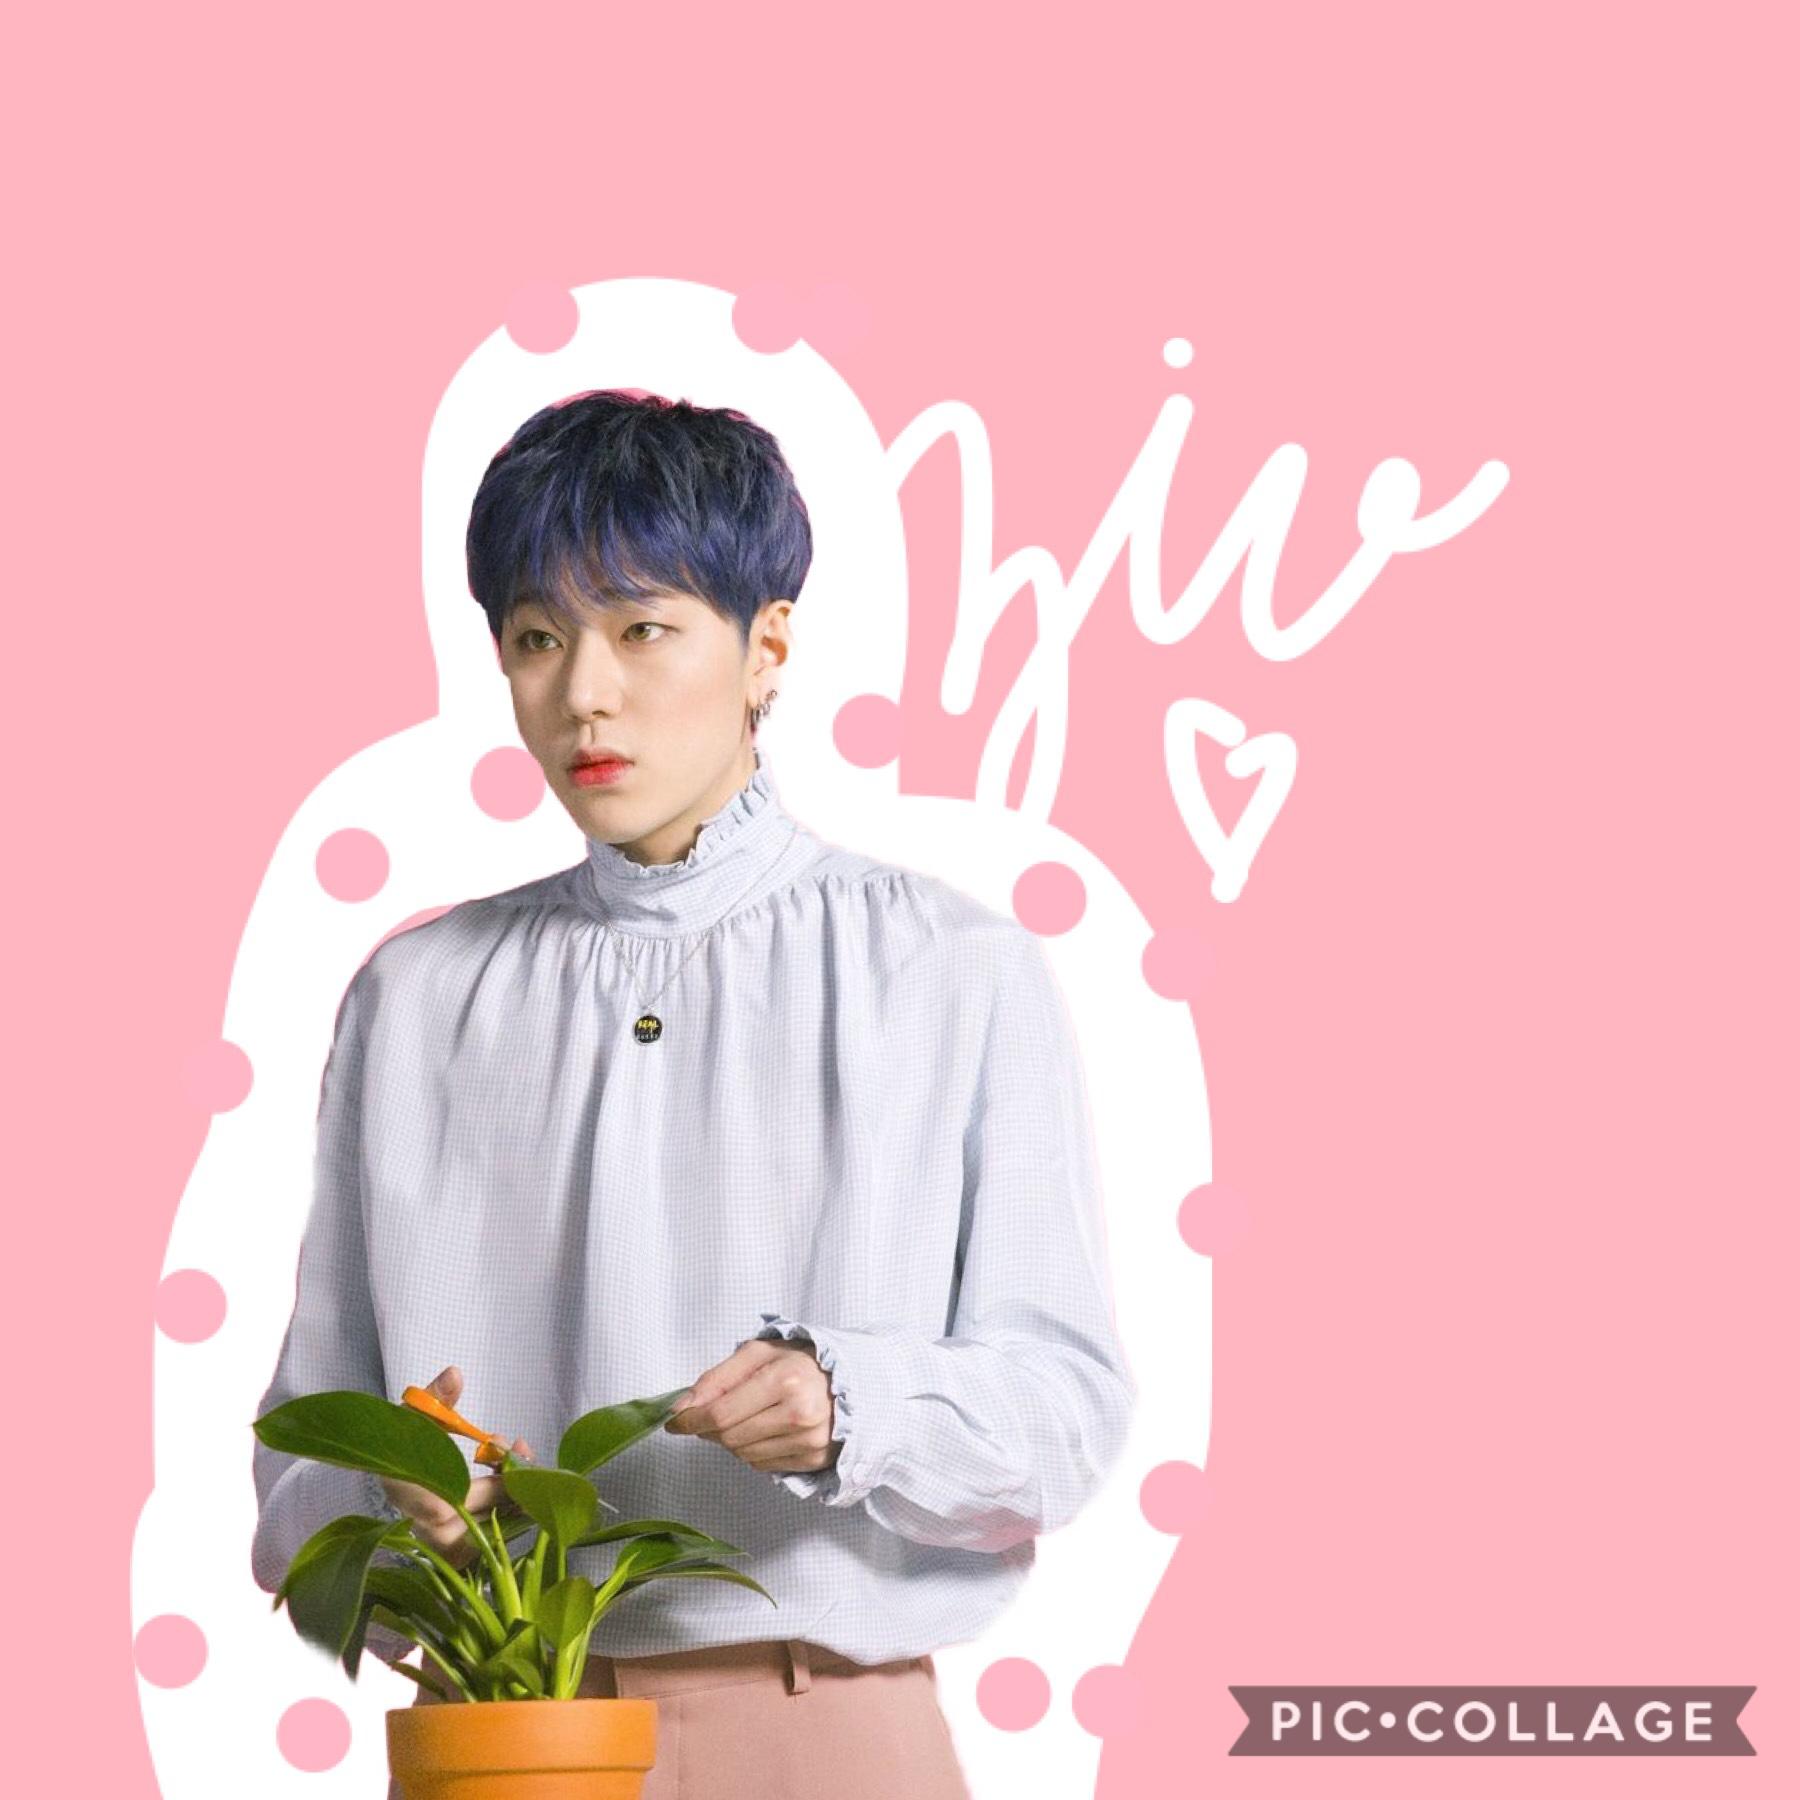 Can zico with plants just be an aesthetic